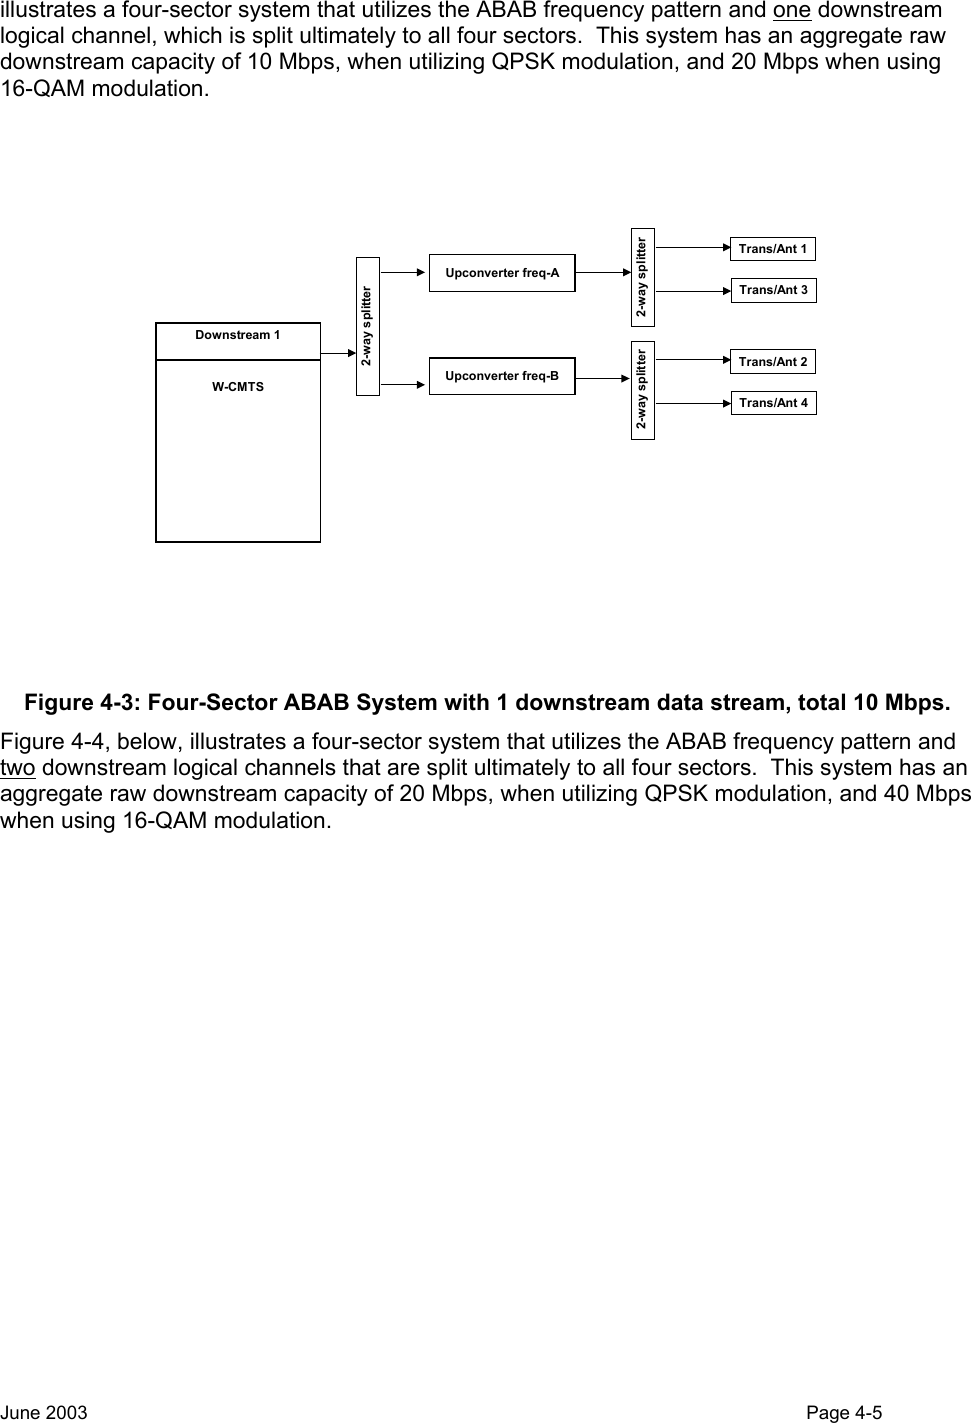  illustrates a four-sector system that utilizes the ABAB frequency pattern and one downstream logical channel, which is split ultimately to all four sectors.  This system has an aggregate raw downstream capacity of 10 Mbps, when utilizing QPSK modulation, and 20 Mbps when using 16-QAM modulation. W-CMTSDownstream 1Upconverter freq-AUpconverter freq-B2-way splitterTrans/Ant 1Trans/Ant 32-way splitterTrans/Ant 2Trans/Ant 42-way splitter Figure 4-3: Four-Sector ABAB System with 1 downstream data stream, total 10 Mbps. Figure 4-4, below, illustrates a four-sector system that utilizes the ABAB frequency pattern and two downstream logical channels that are split ultimately to all four sectors.  This system has an aggregate raw downstream capacity of 20 Mbps, when utilizing QPSK modulation, and 40 Mbps when using 16-QAM modulation. June 2003                                                                                                                                          Page 4-5  